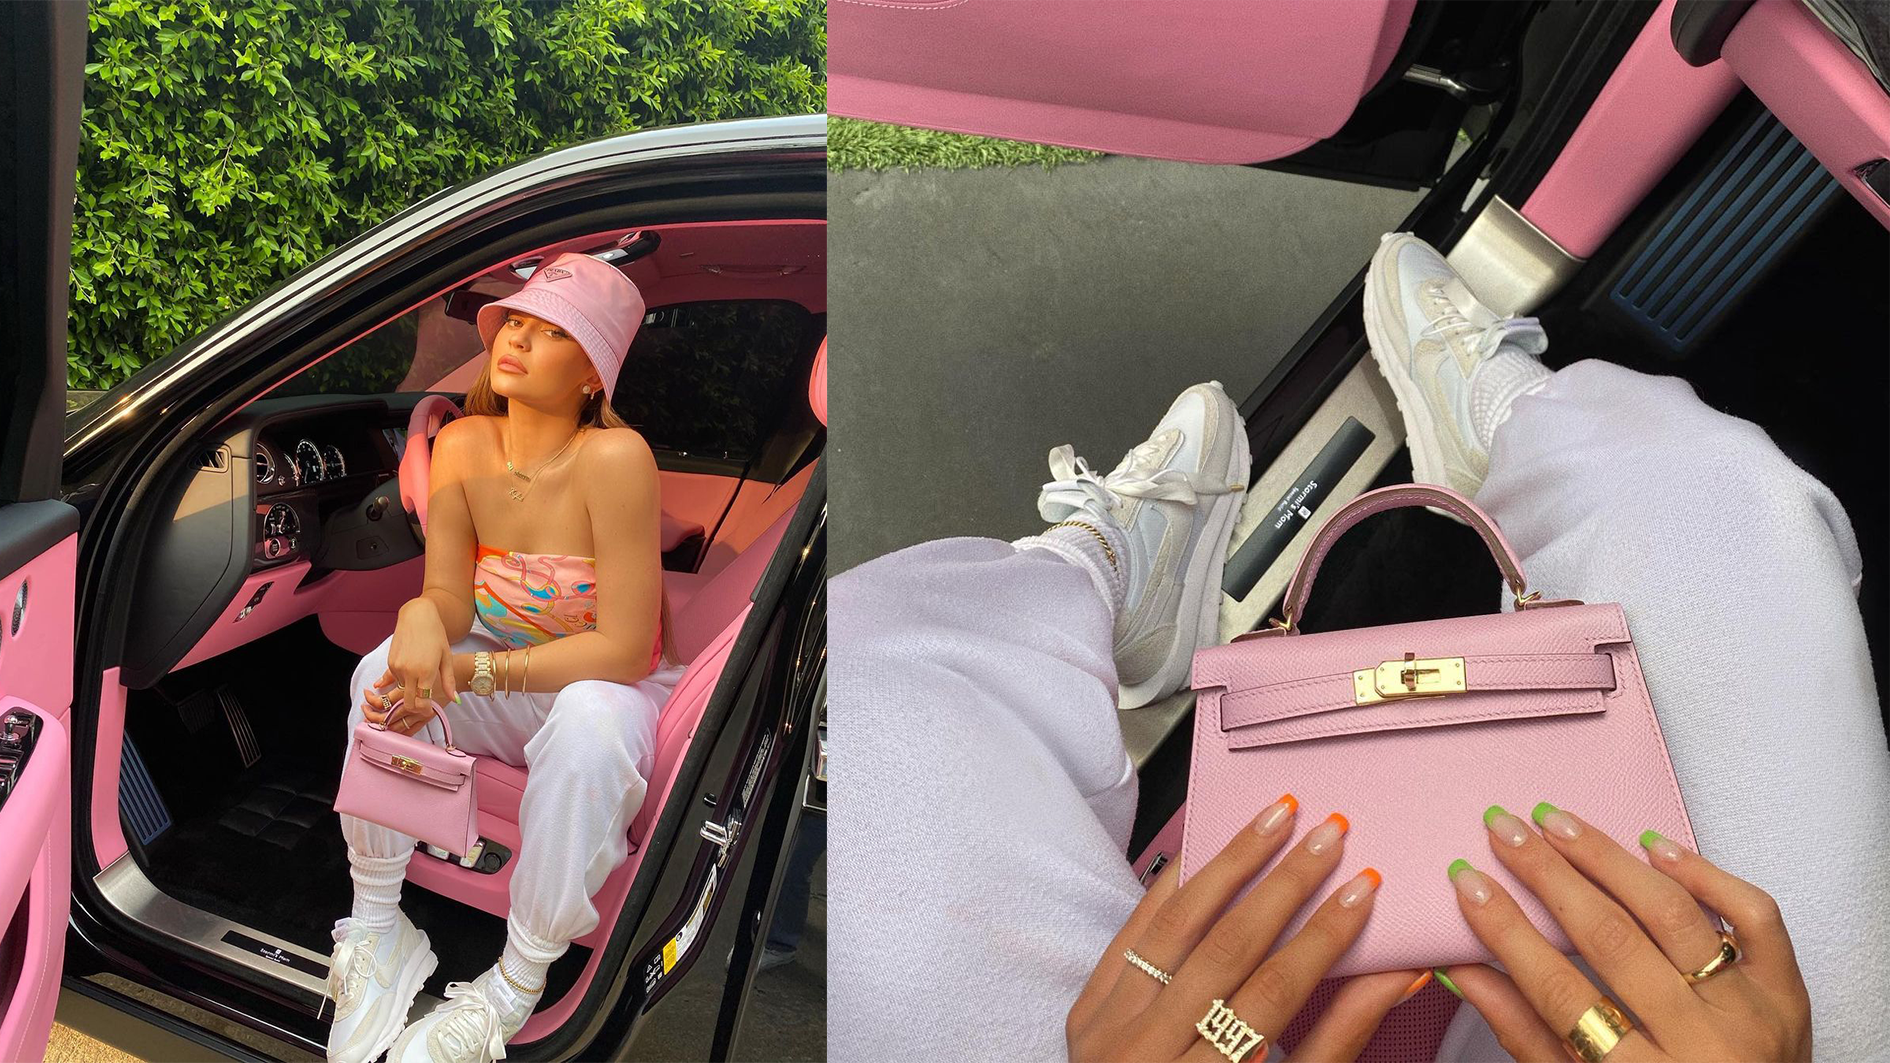 Kylie Jenner pairs brown stiletto nails with a $300K Birkin bag